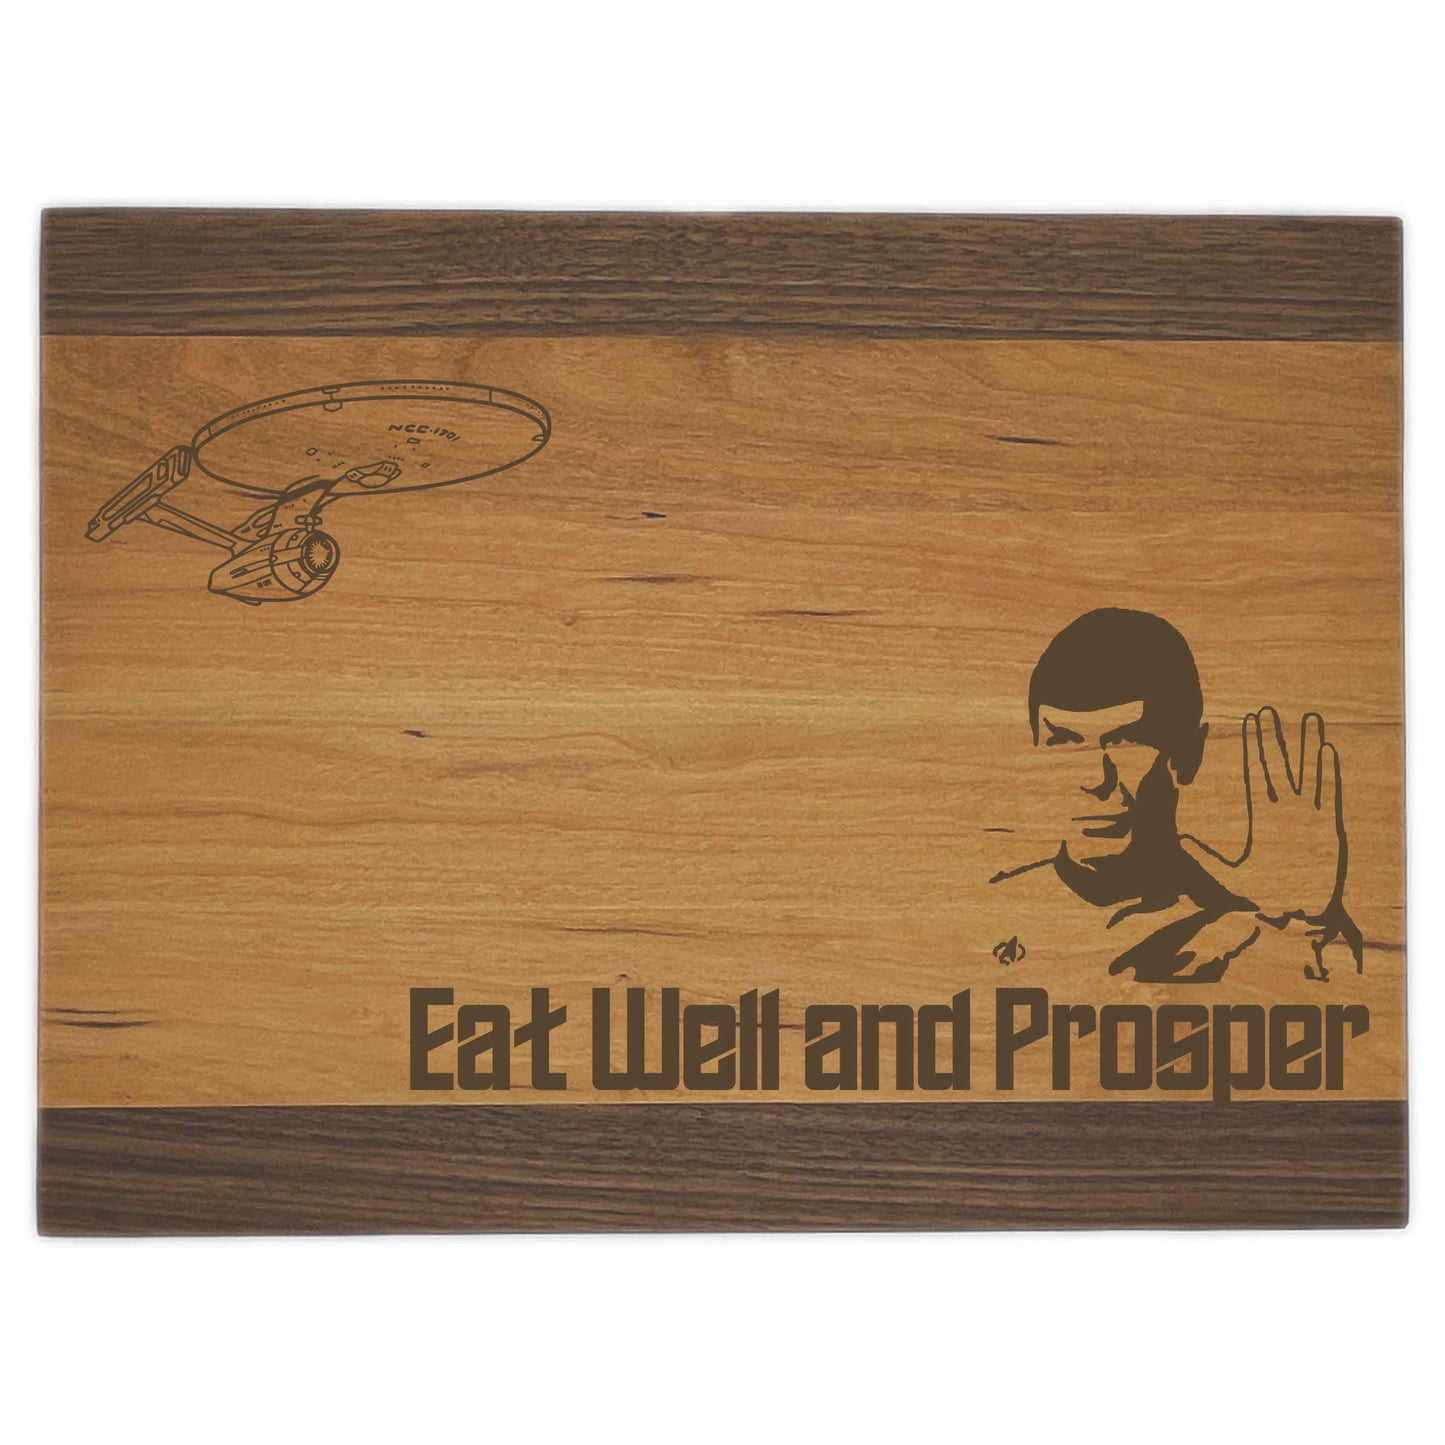 Star Trek Premium Cutting Boards | Spock | Eat Well and Prosper Wood Cutting Boards | Different Styles Available